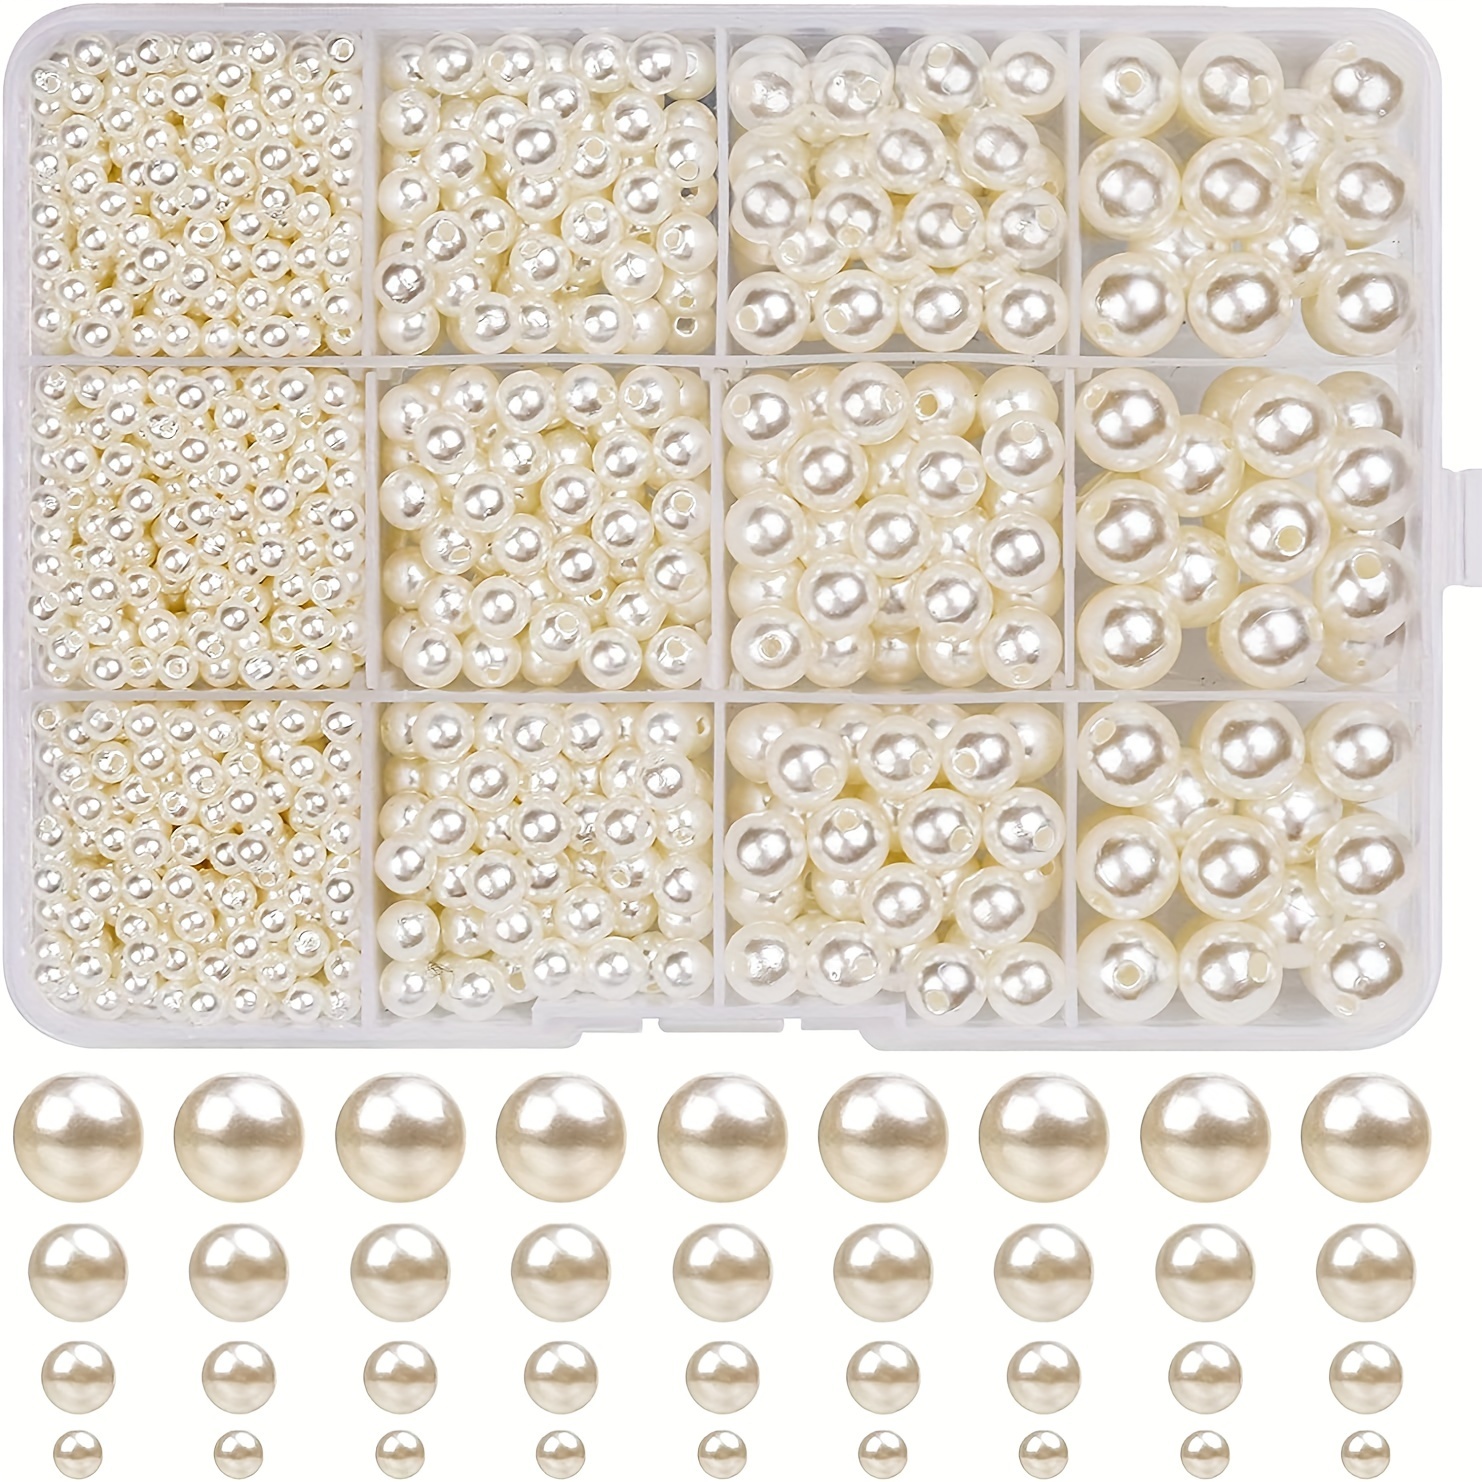 

1320 Pcs Fashion Beading Kit - Abs Imitation Pearls, Assorted Sizes 4/6/8/10mm, Round Hollow Beads For Diy Jewelry Making, Necklace, Bracelet - White & Off-white Pearls With Storage Box